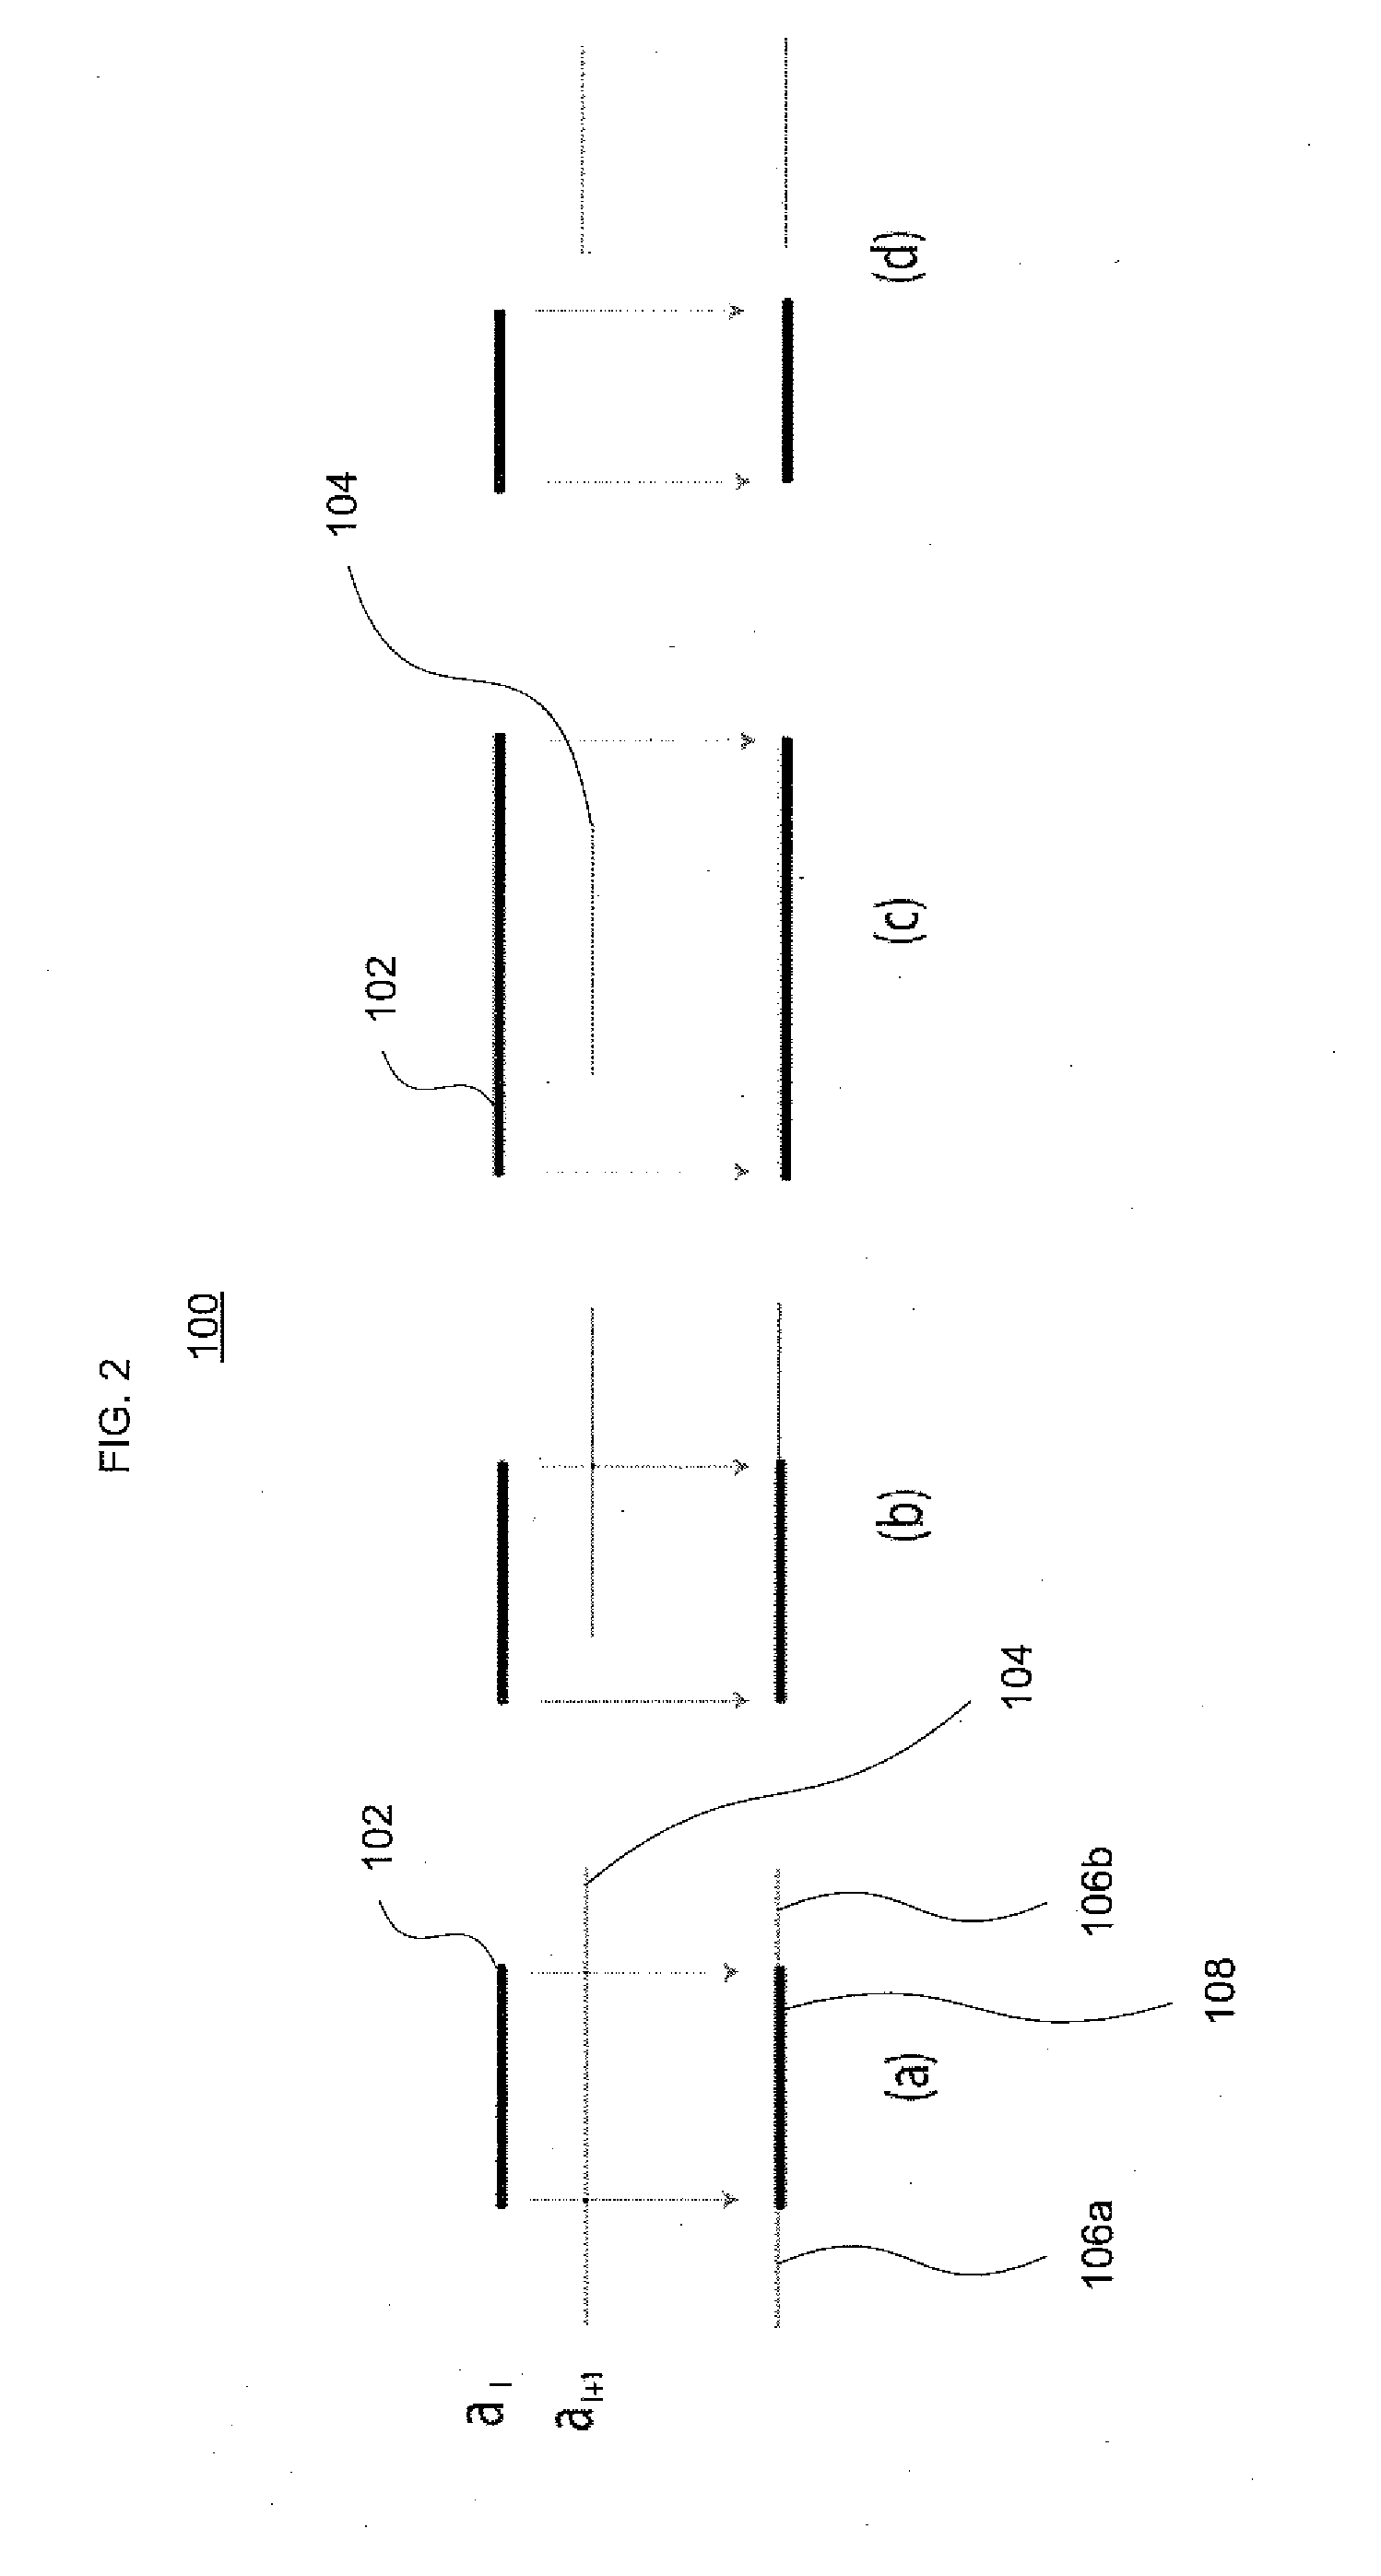 System and method for determining symantic equivalence between access control lists